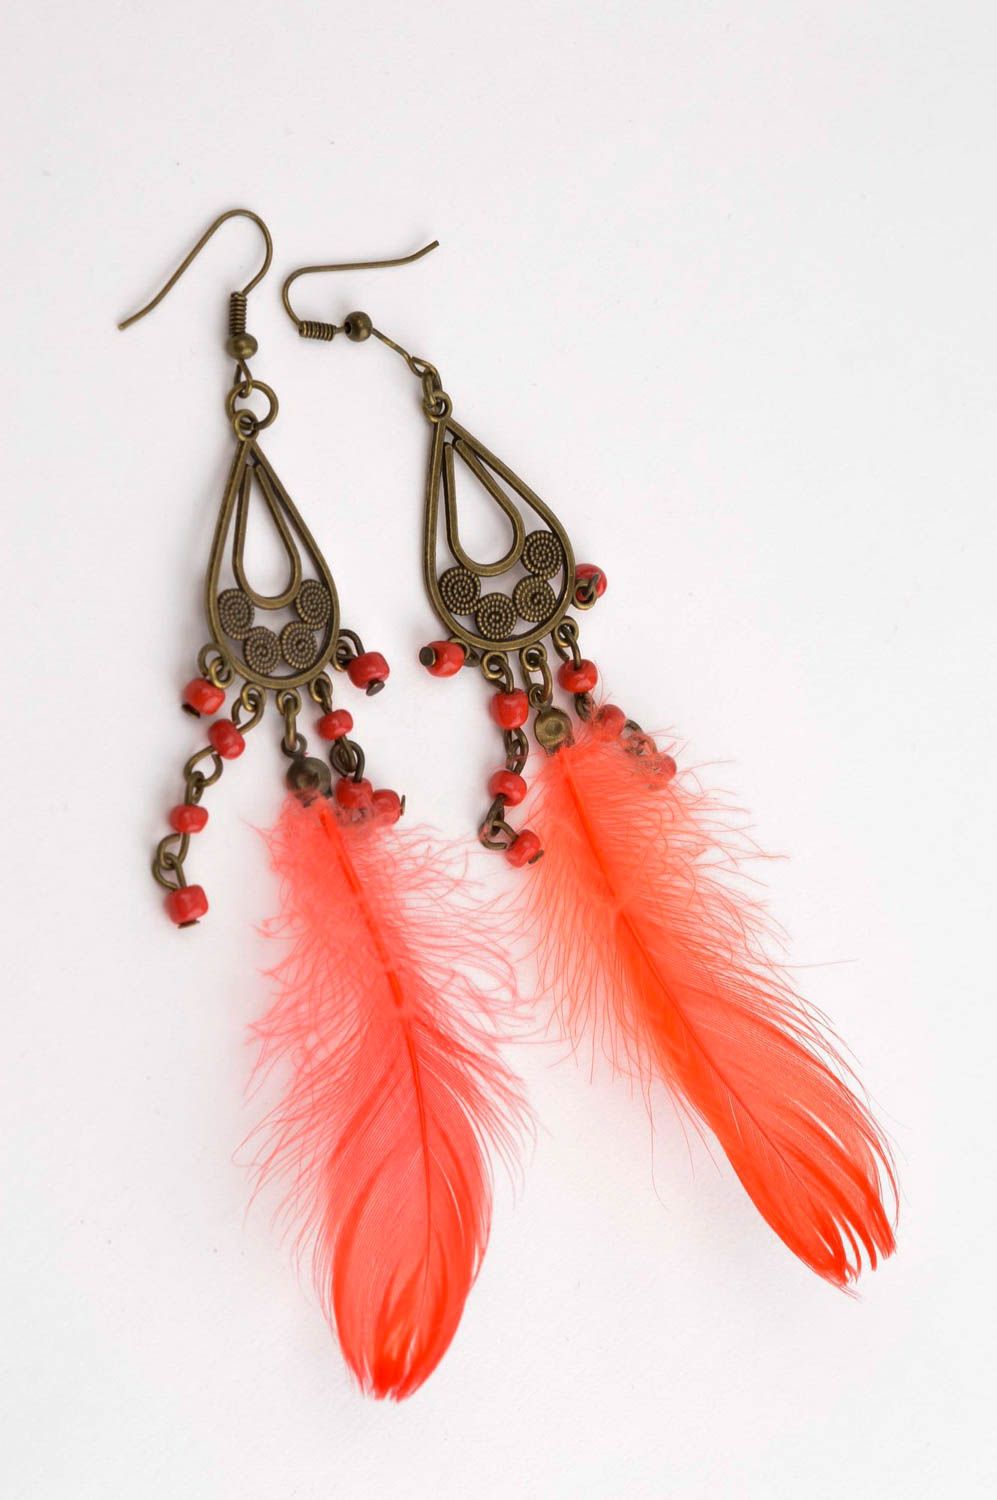 Handmade earrings unusual earrings with feathers clay earrings with charms  photo 3